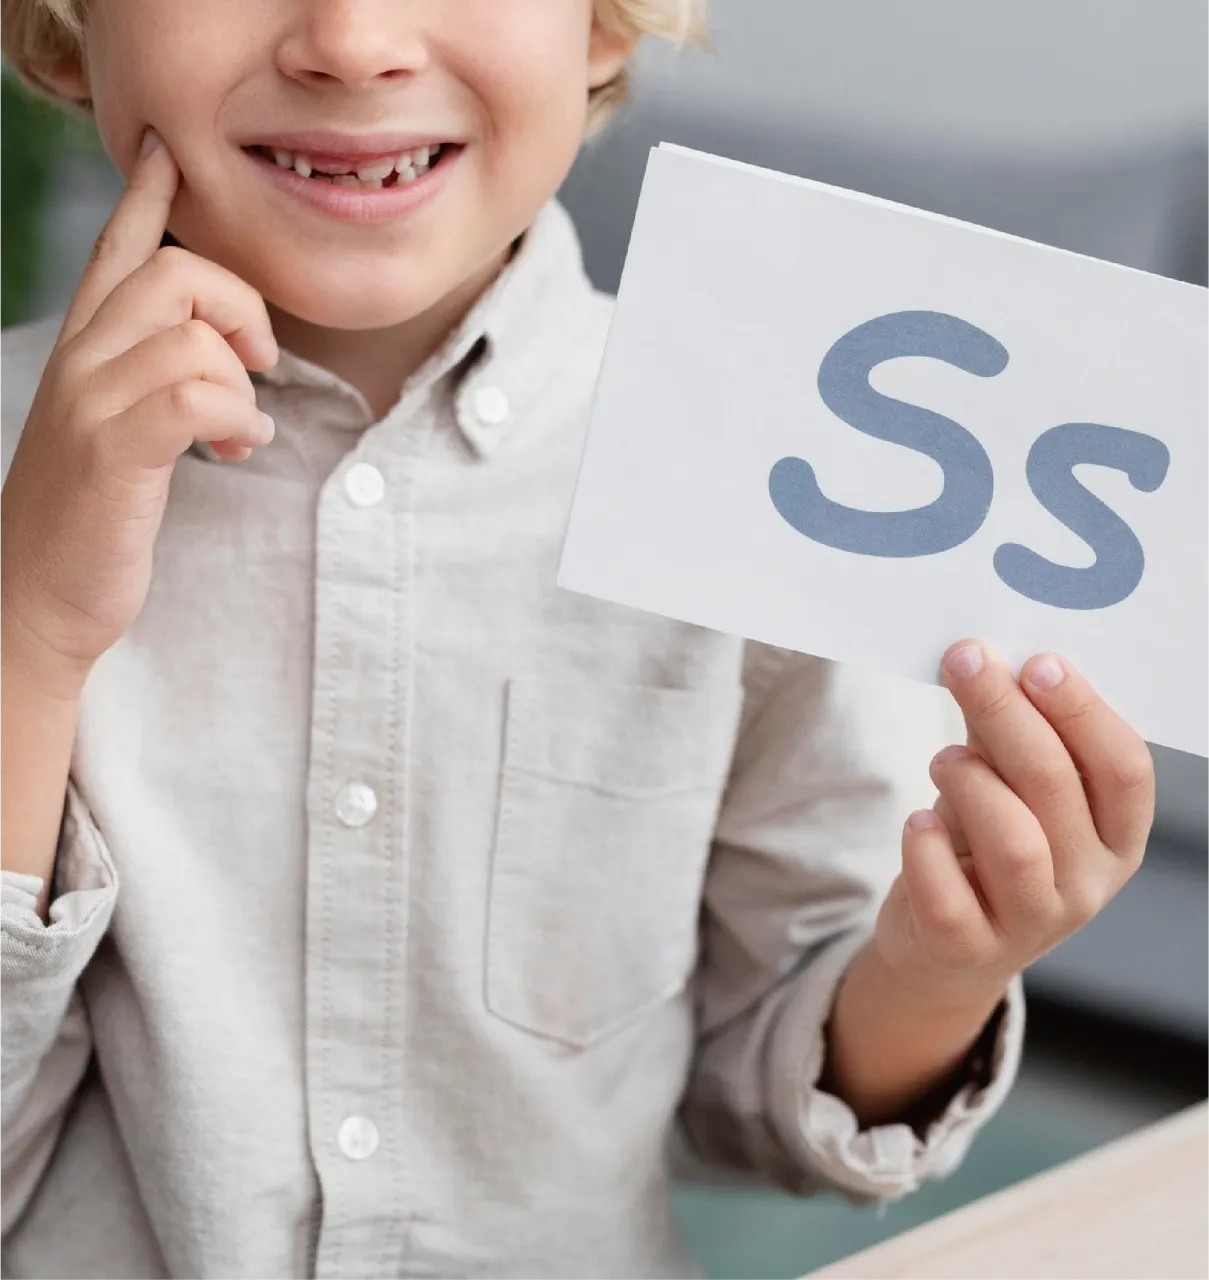 A smiling child holding a paper with Ss written on it